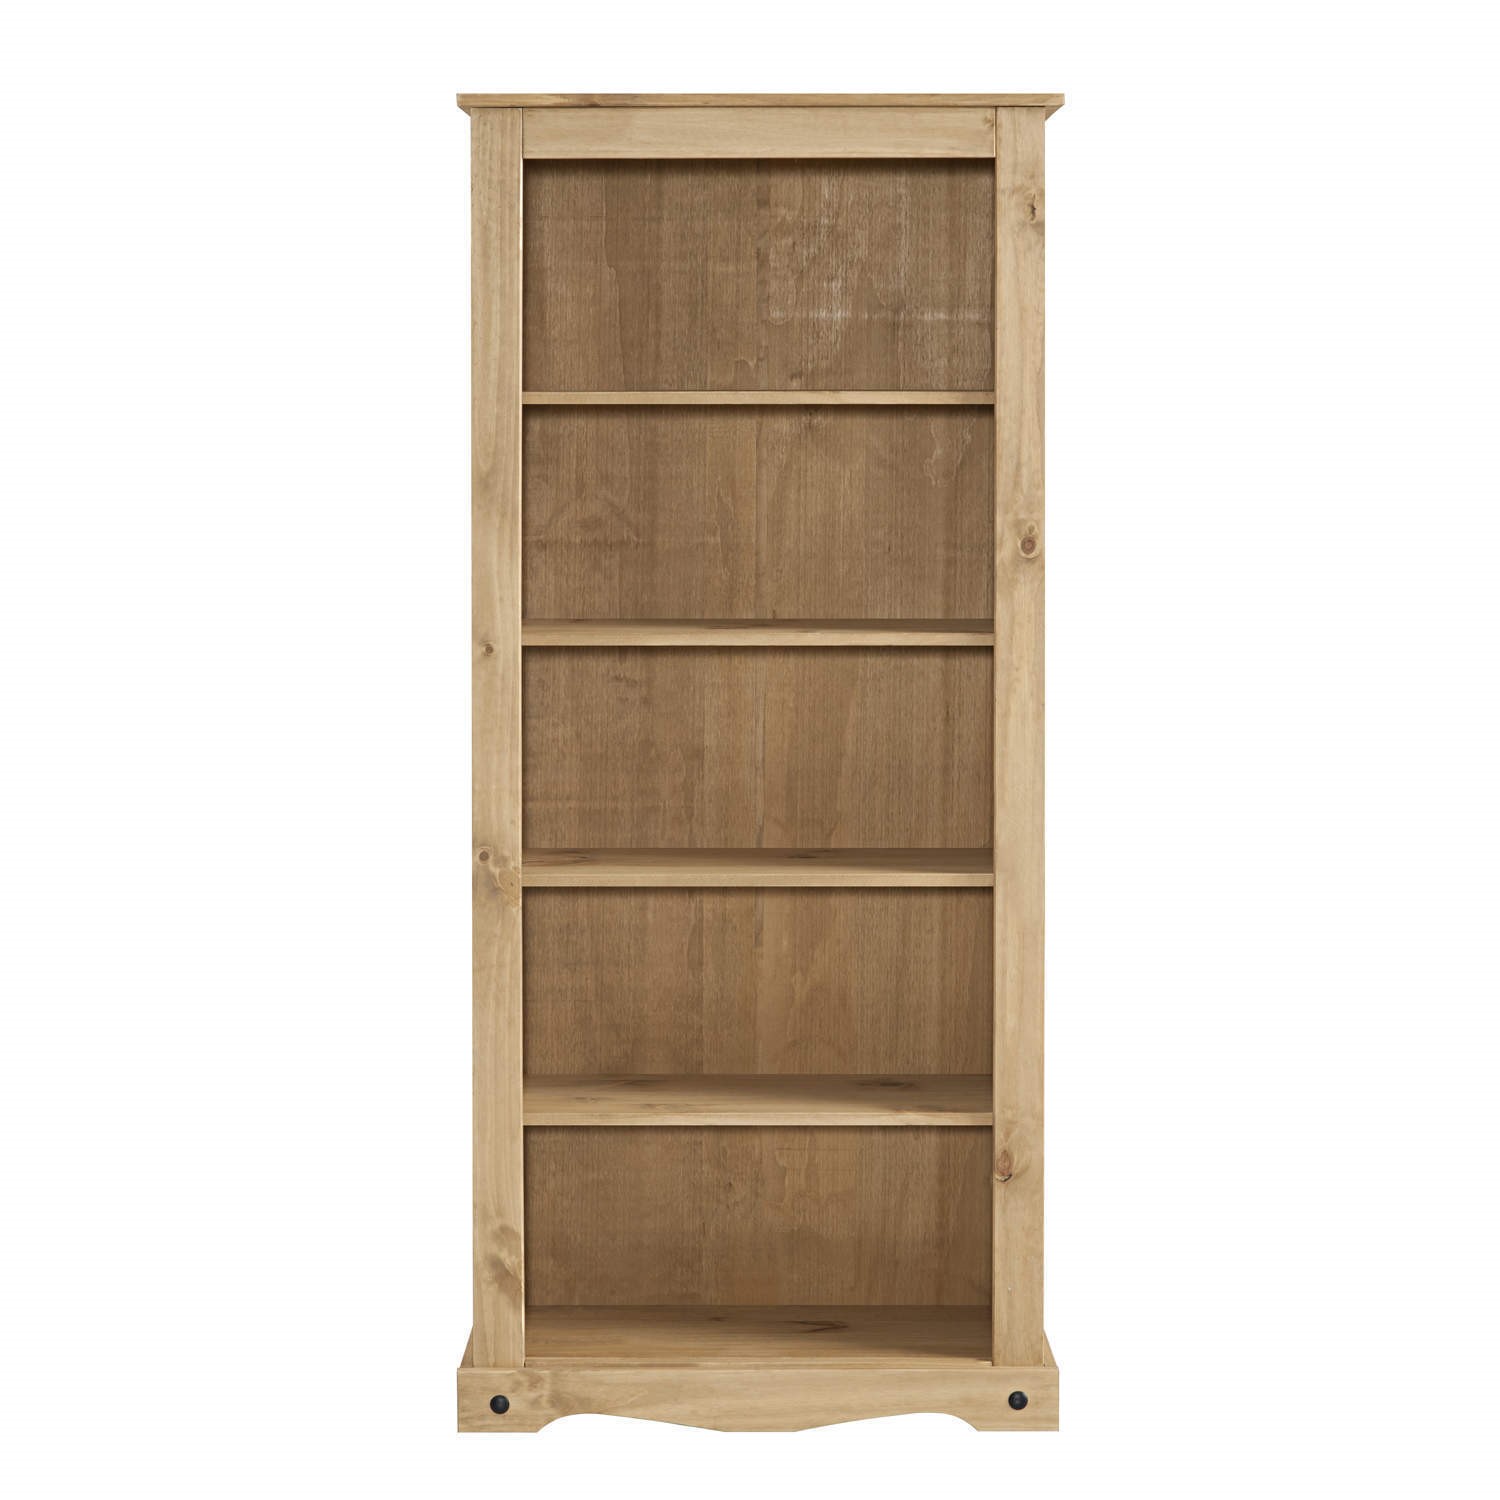 Corona Solid Pine Bookcase 6ft Tall Bookshelf With 5 Shelves